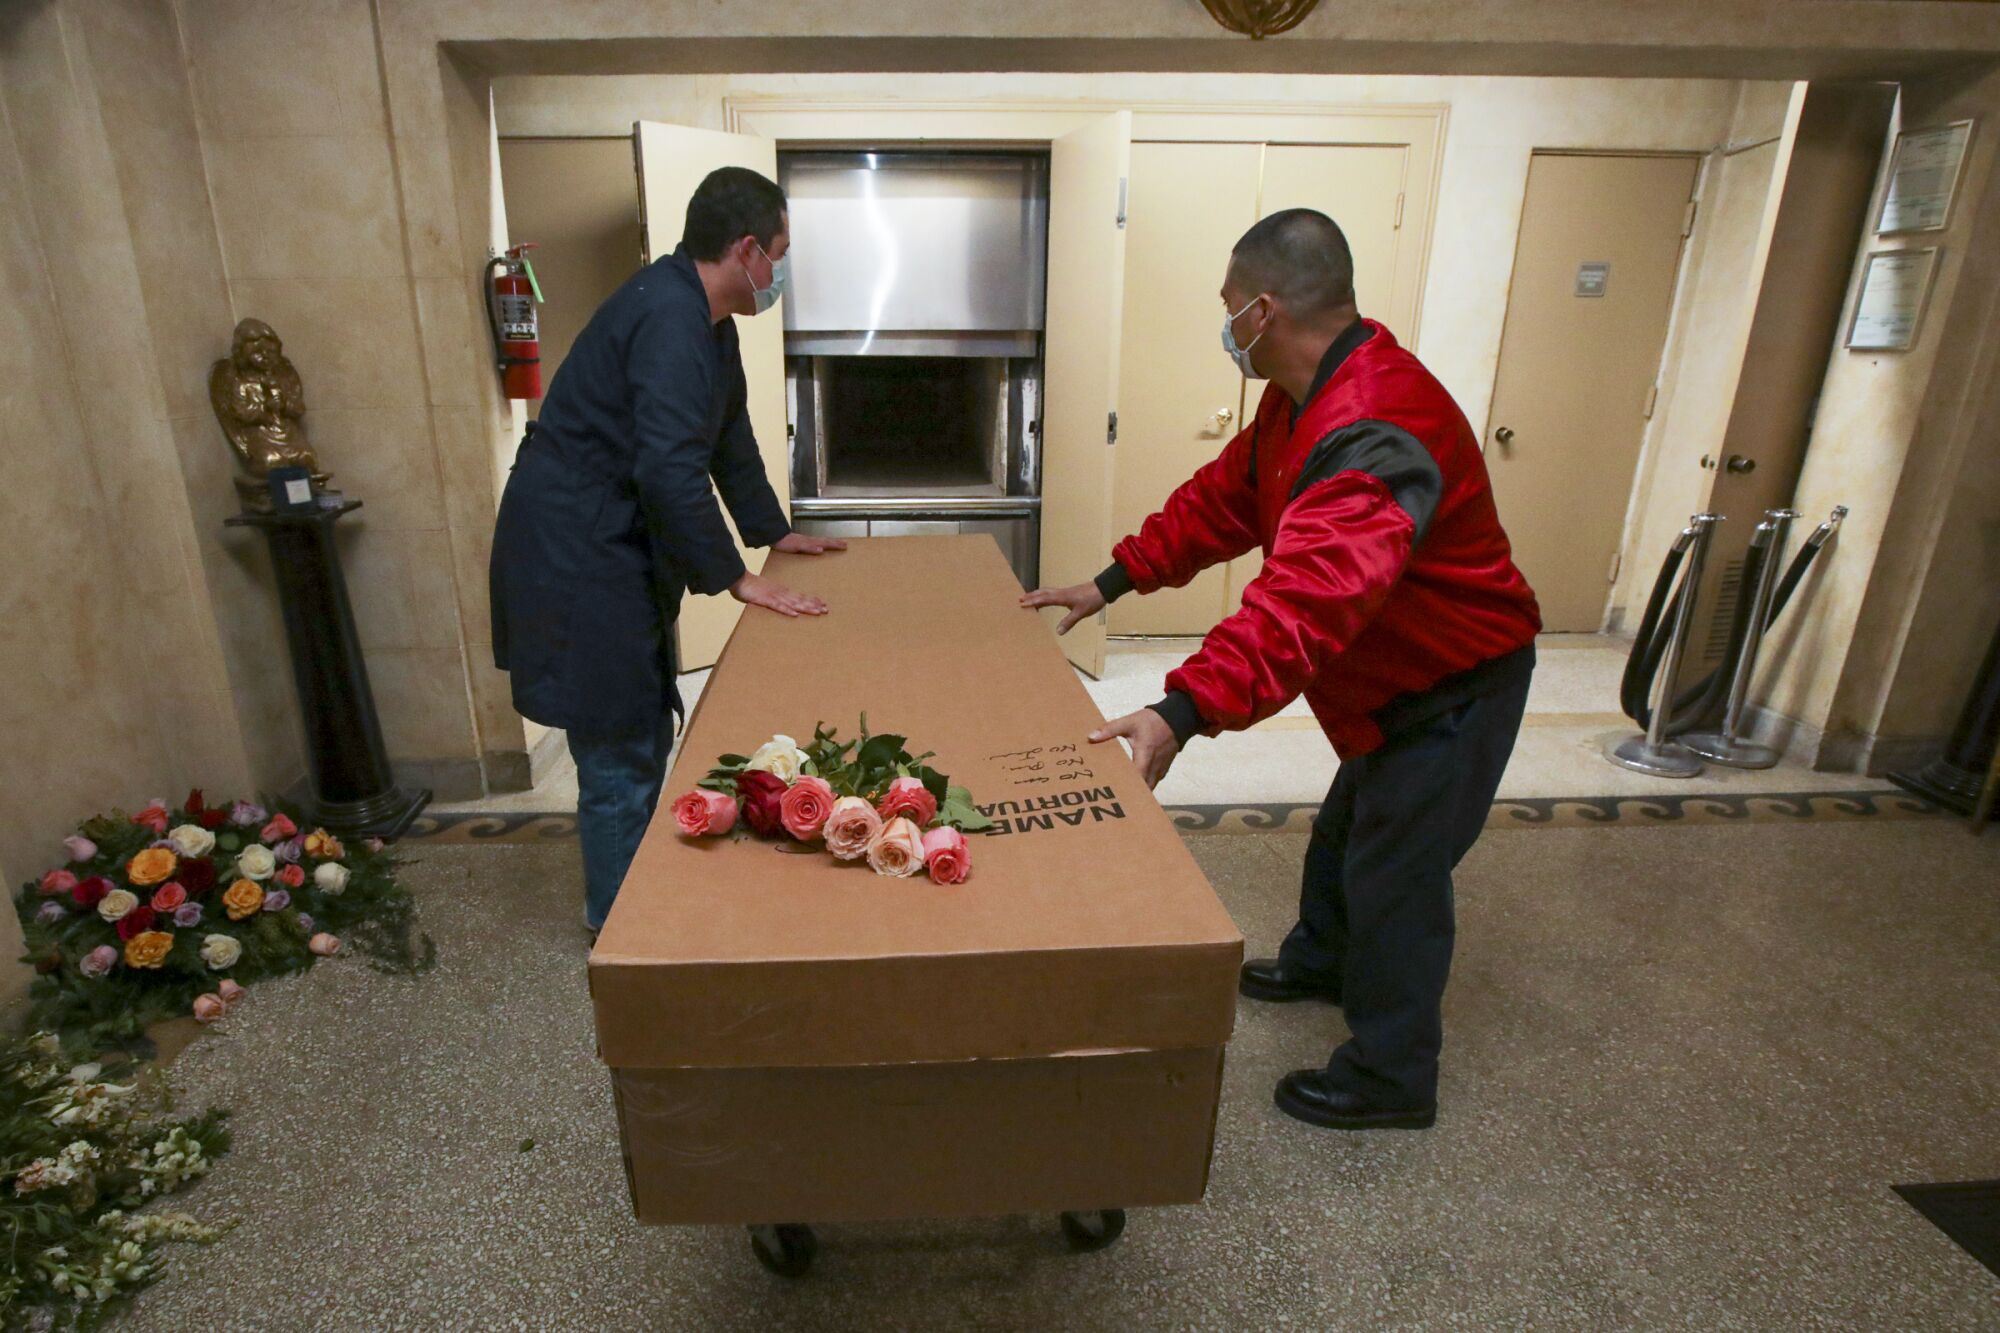 A pair of workers handle a cardboard container topped with roses